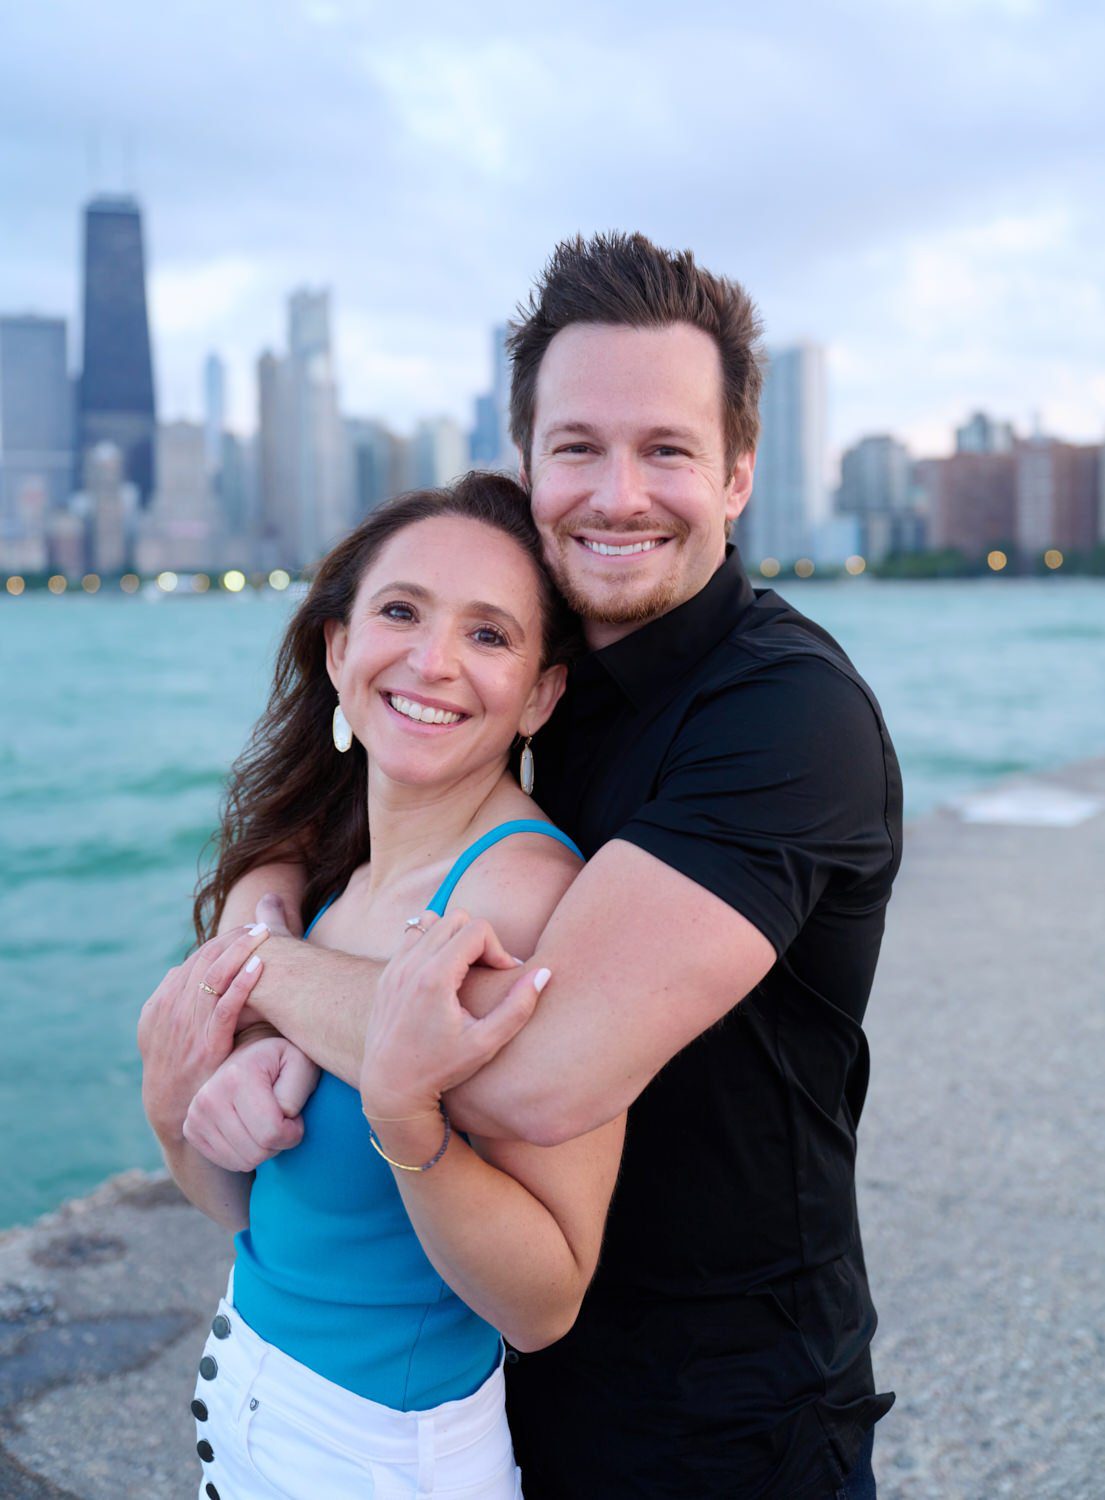 North Avenue Beach engagement photos chicago couple engaged smiling